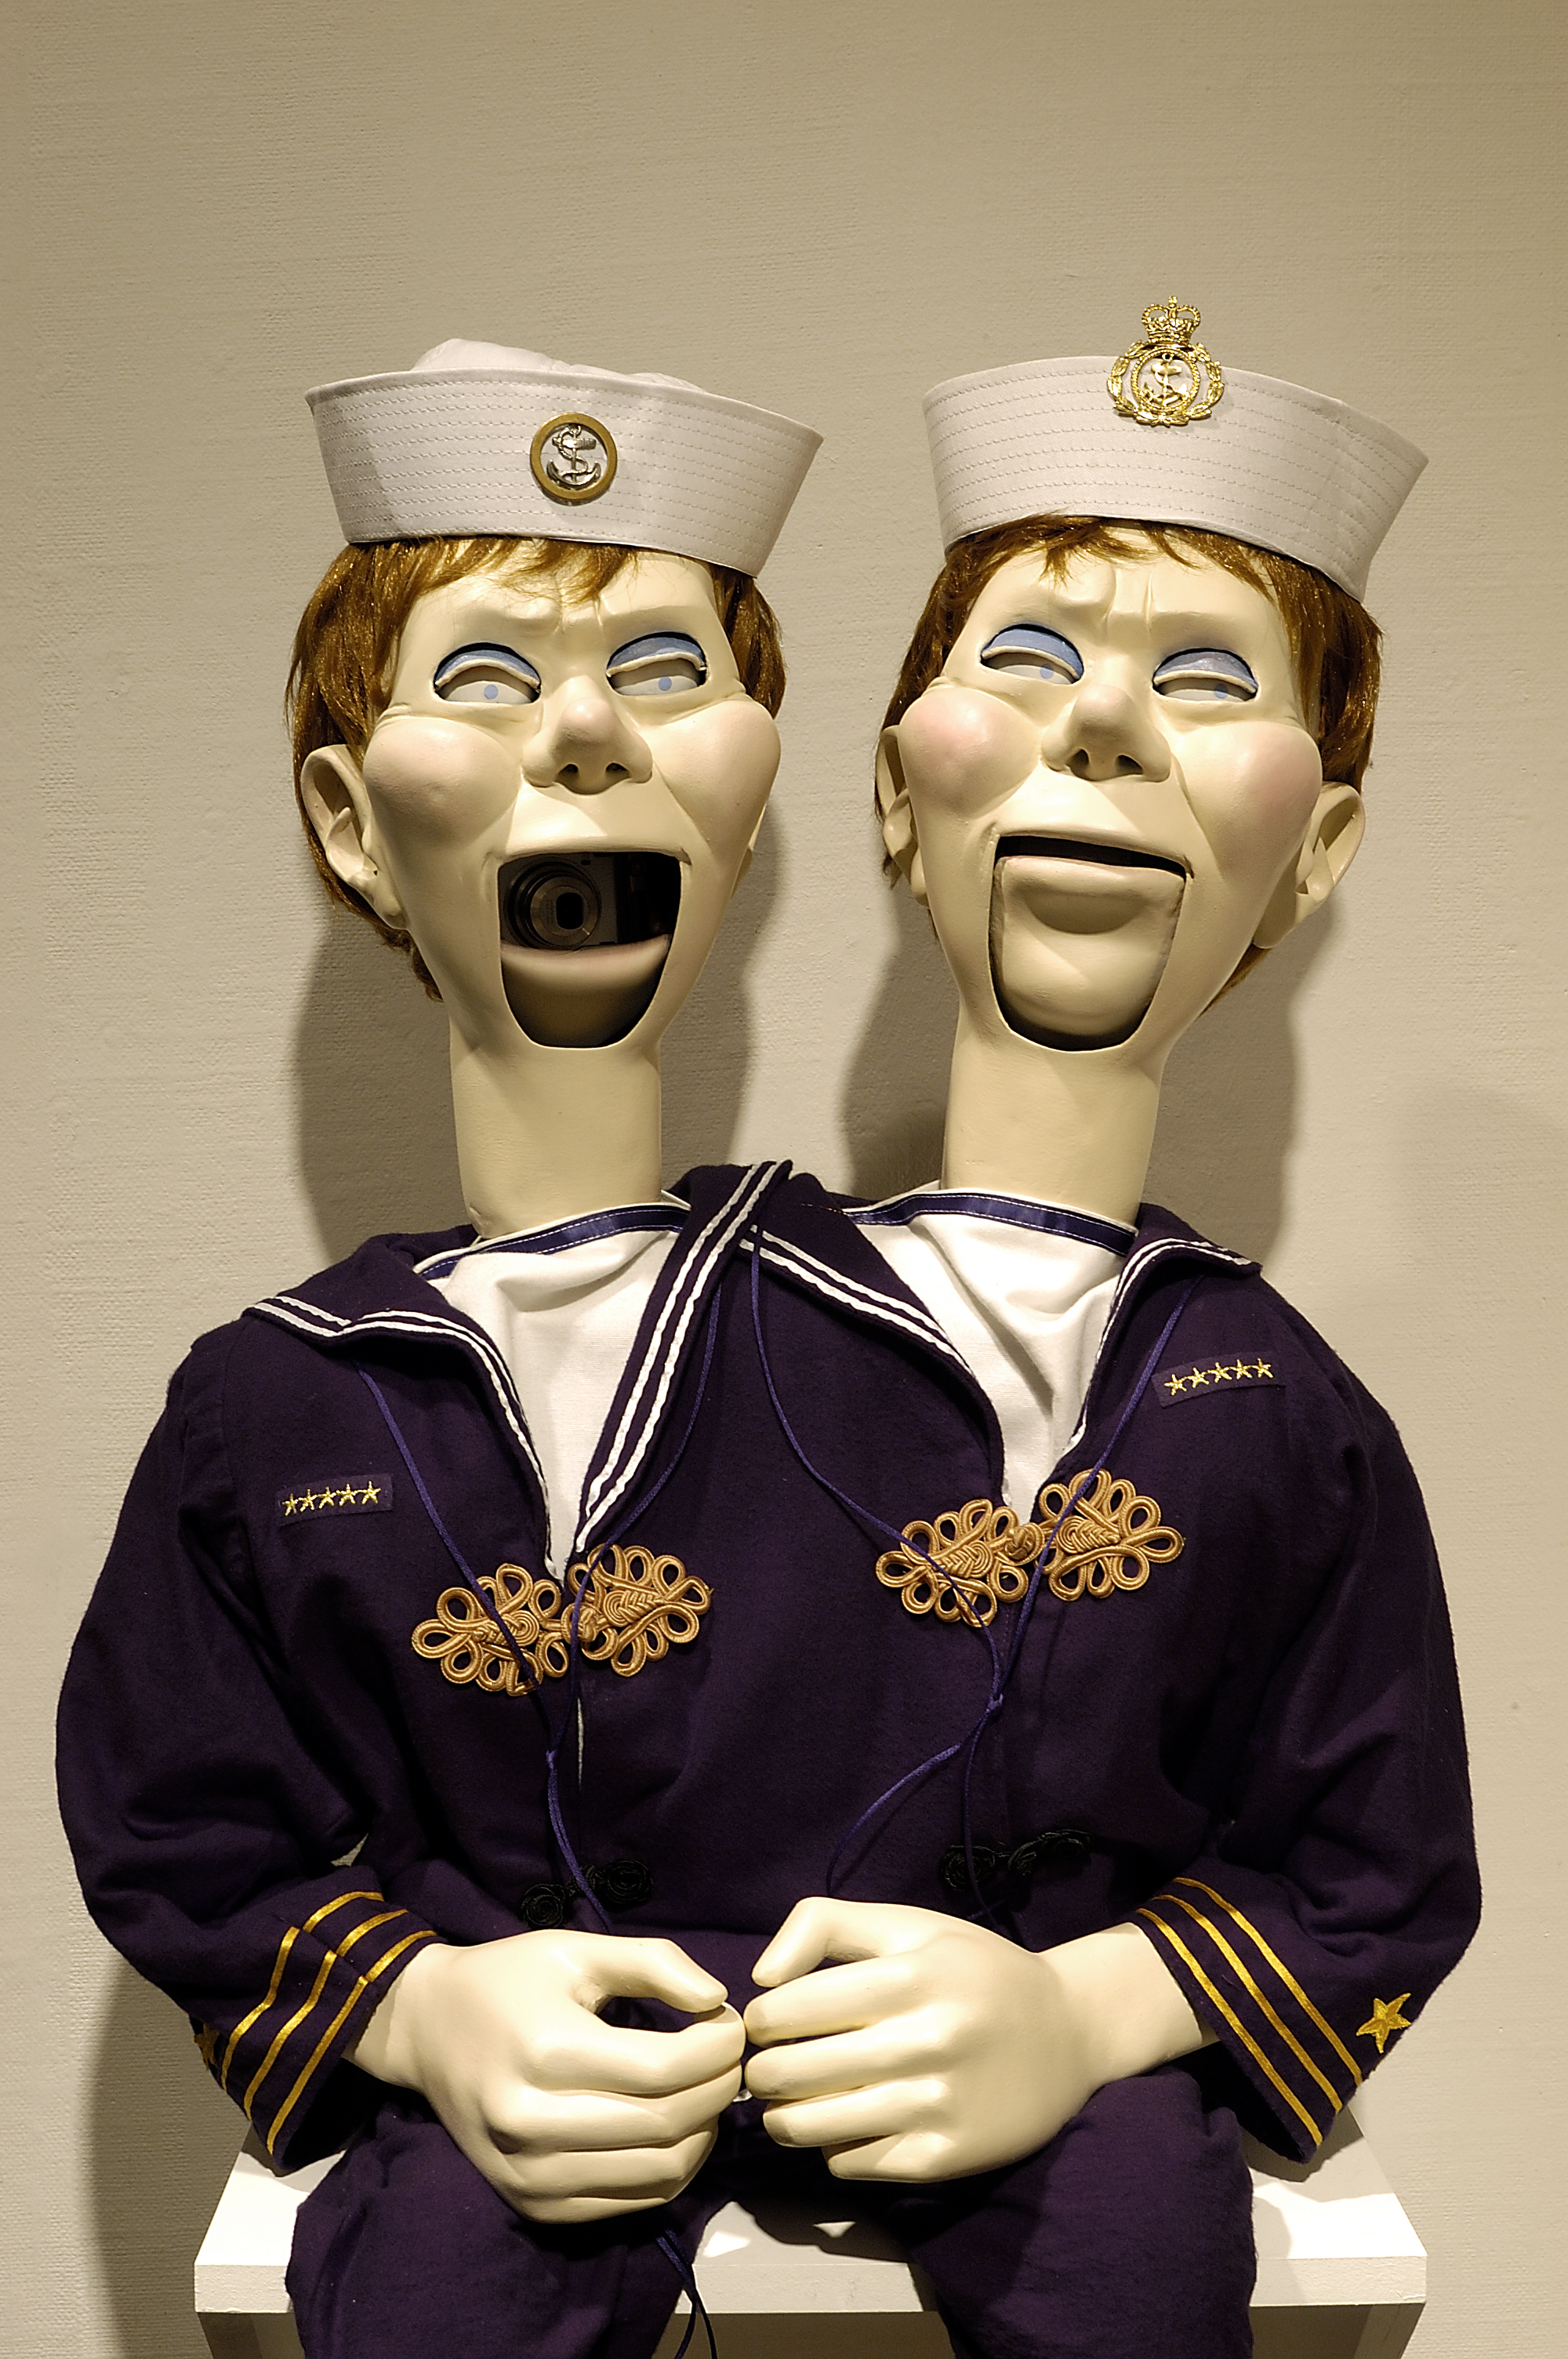 2 headed ventriloquist dummy. The dummy is dressed as a sailor, one head has mouth open, the other mouth closed. Included in the exhibition Lindsay Seers: I Can’t Tell You.